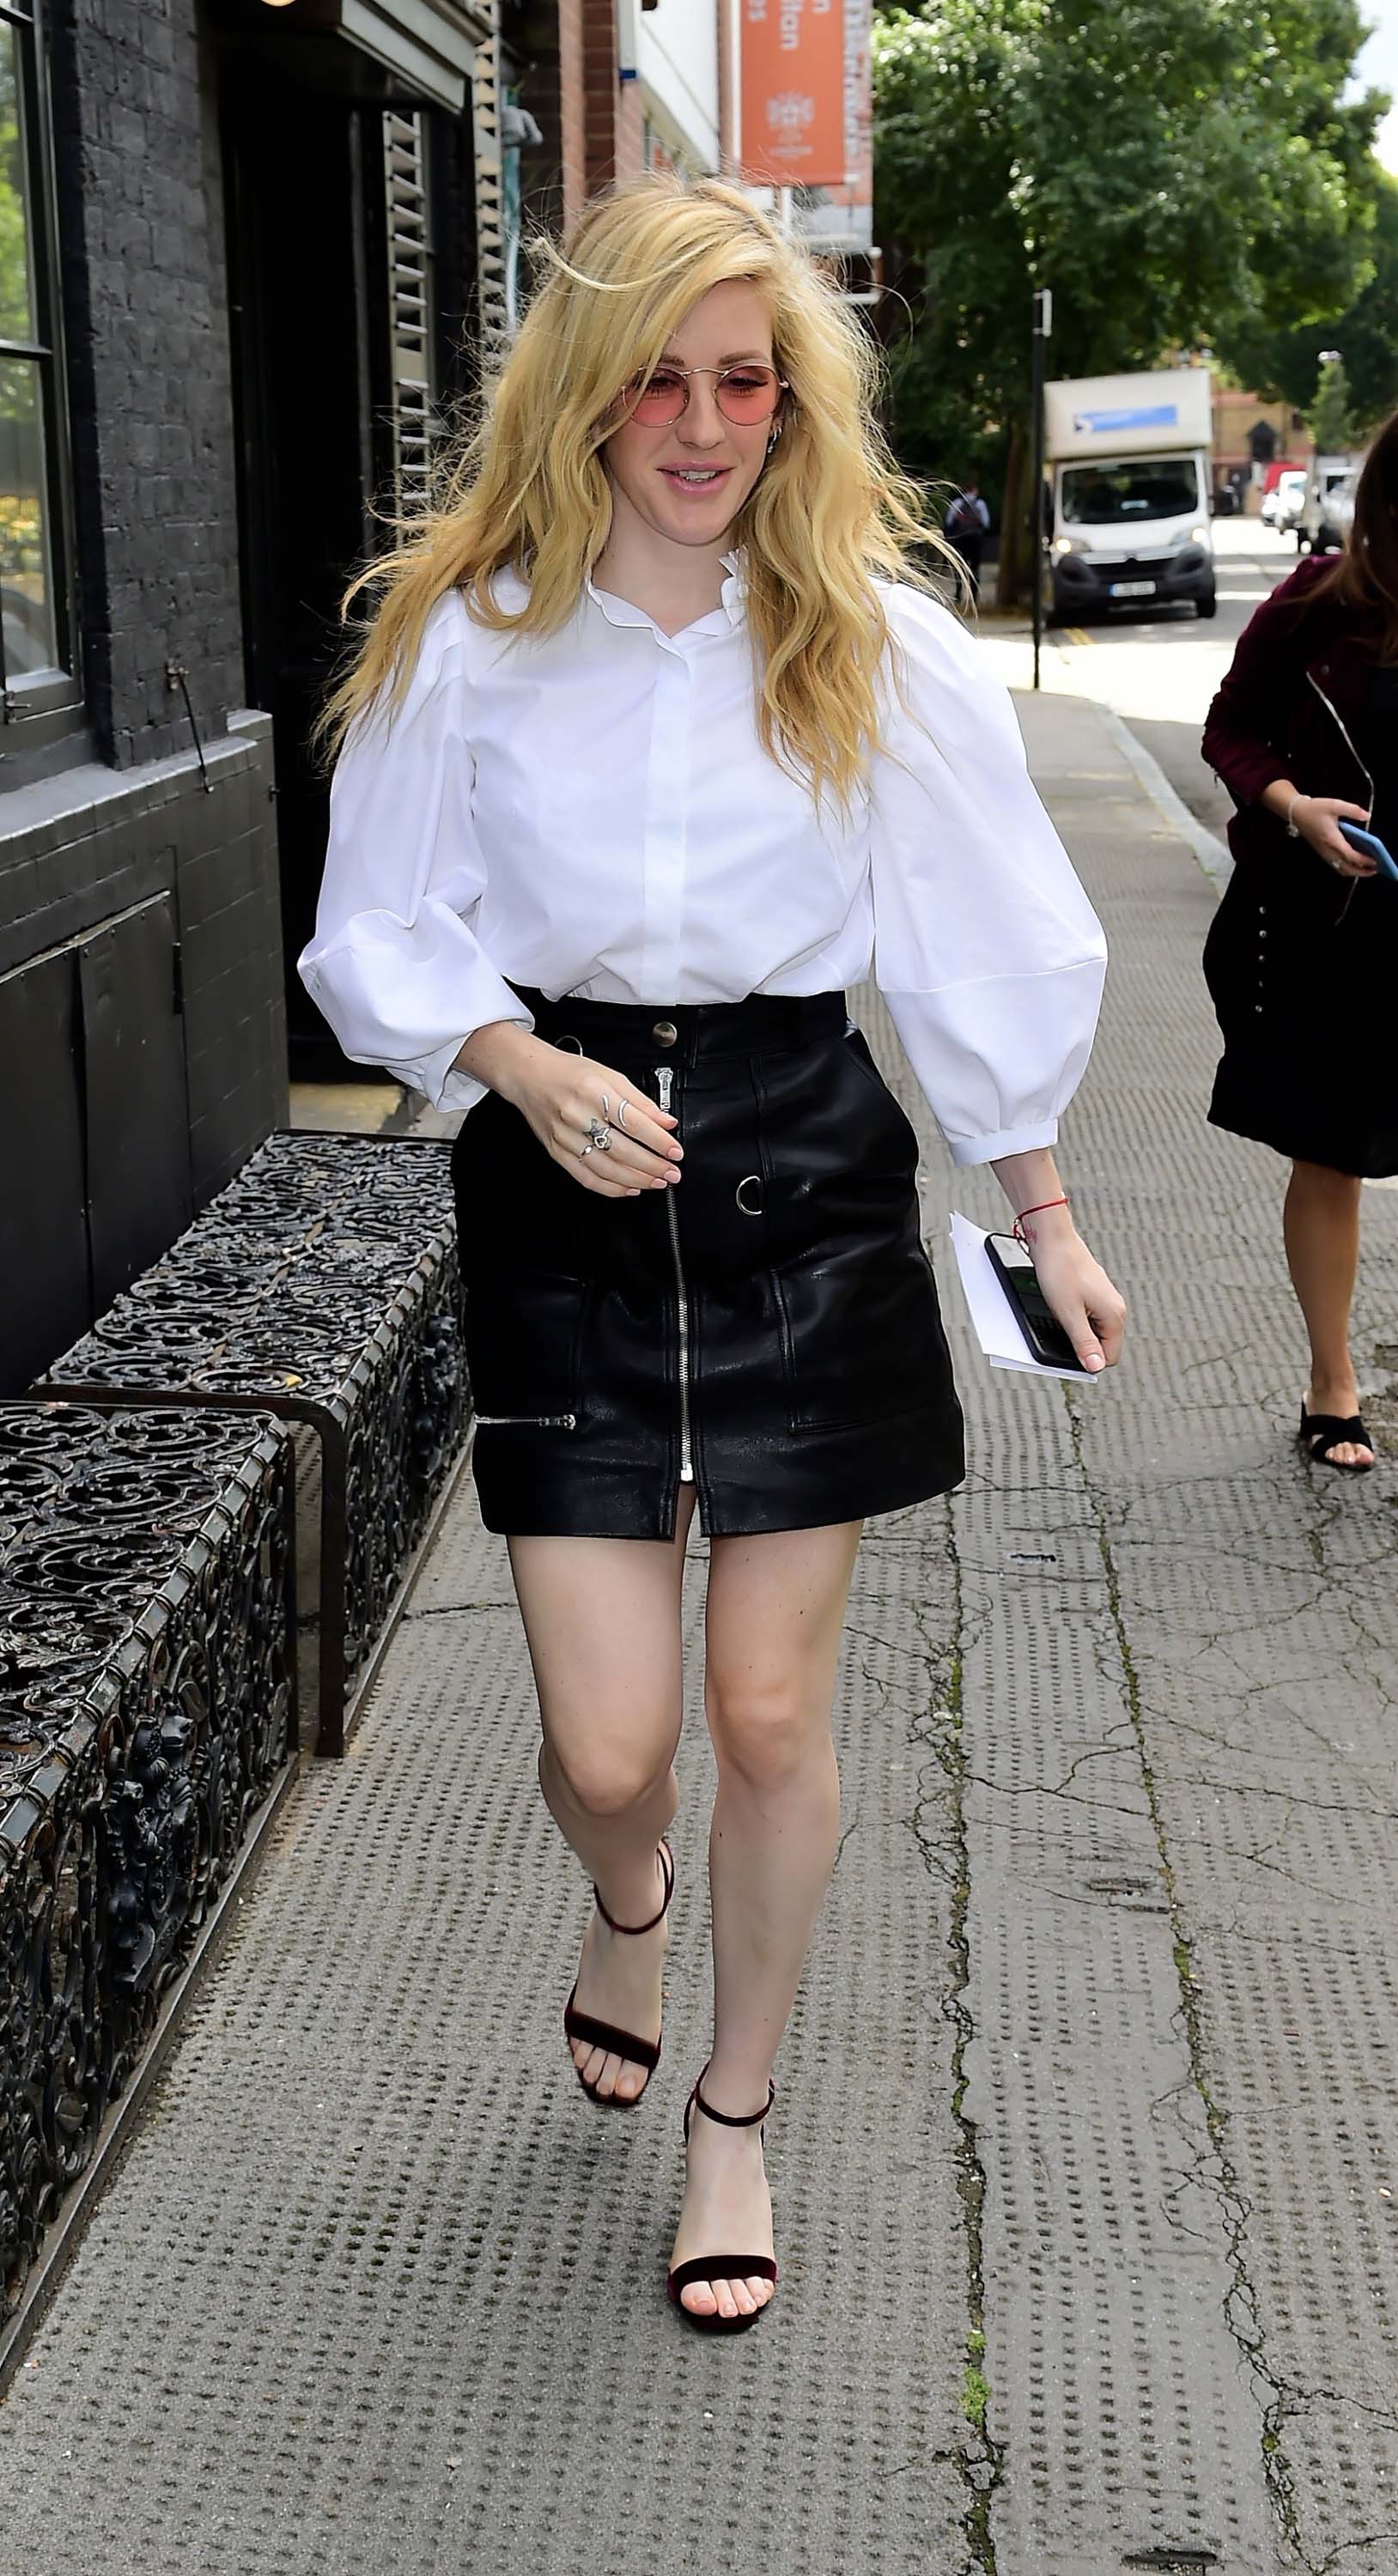 Ellie Goulding arriving at the Daisy London x Elle Goulding breakfast party